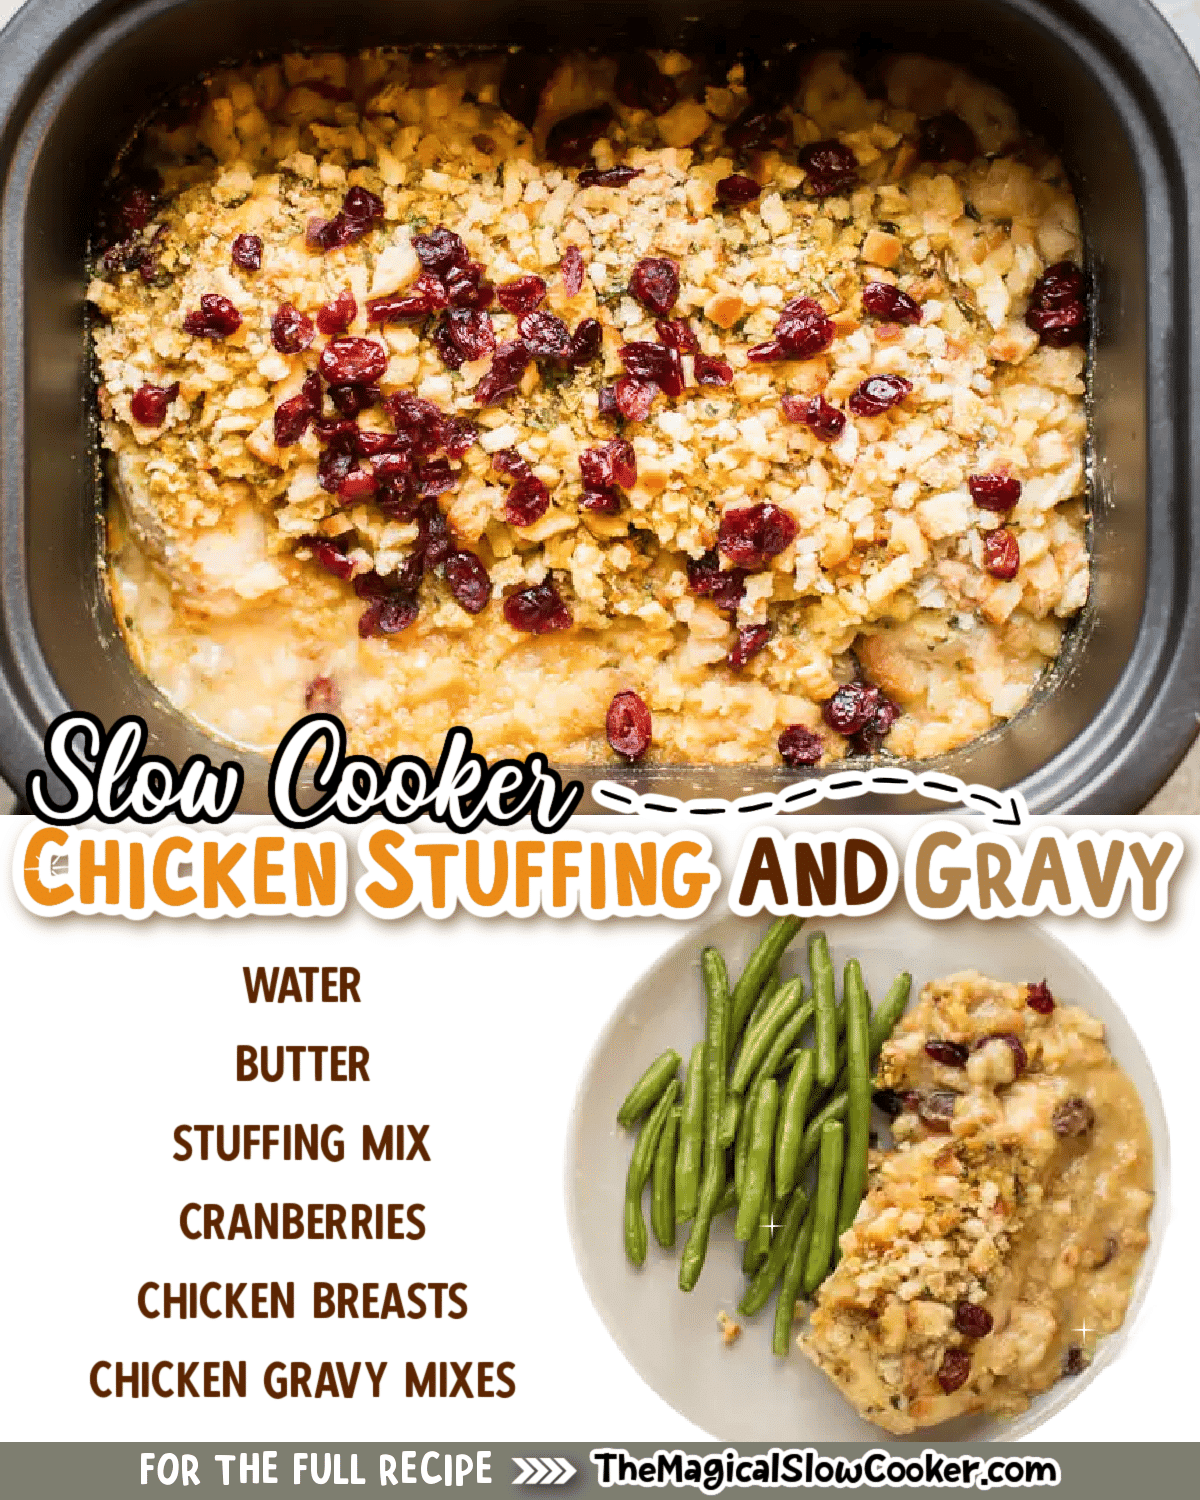 Slow Cooker Chicken, Stuffing and Gravy - The Magical Slow Cooker